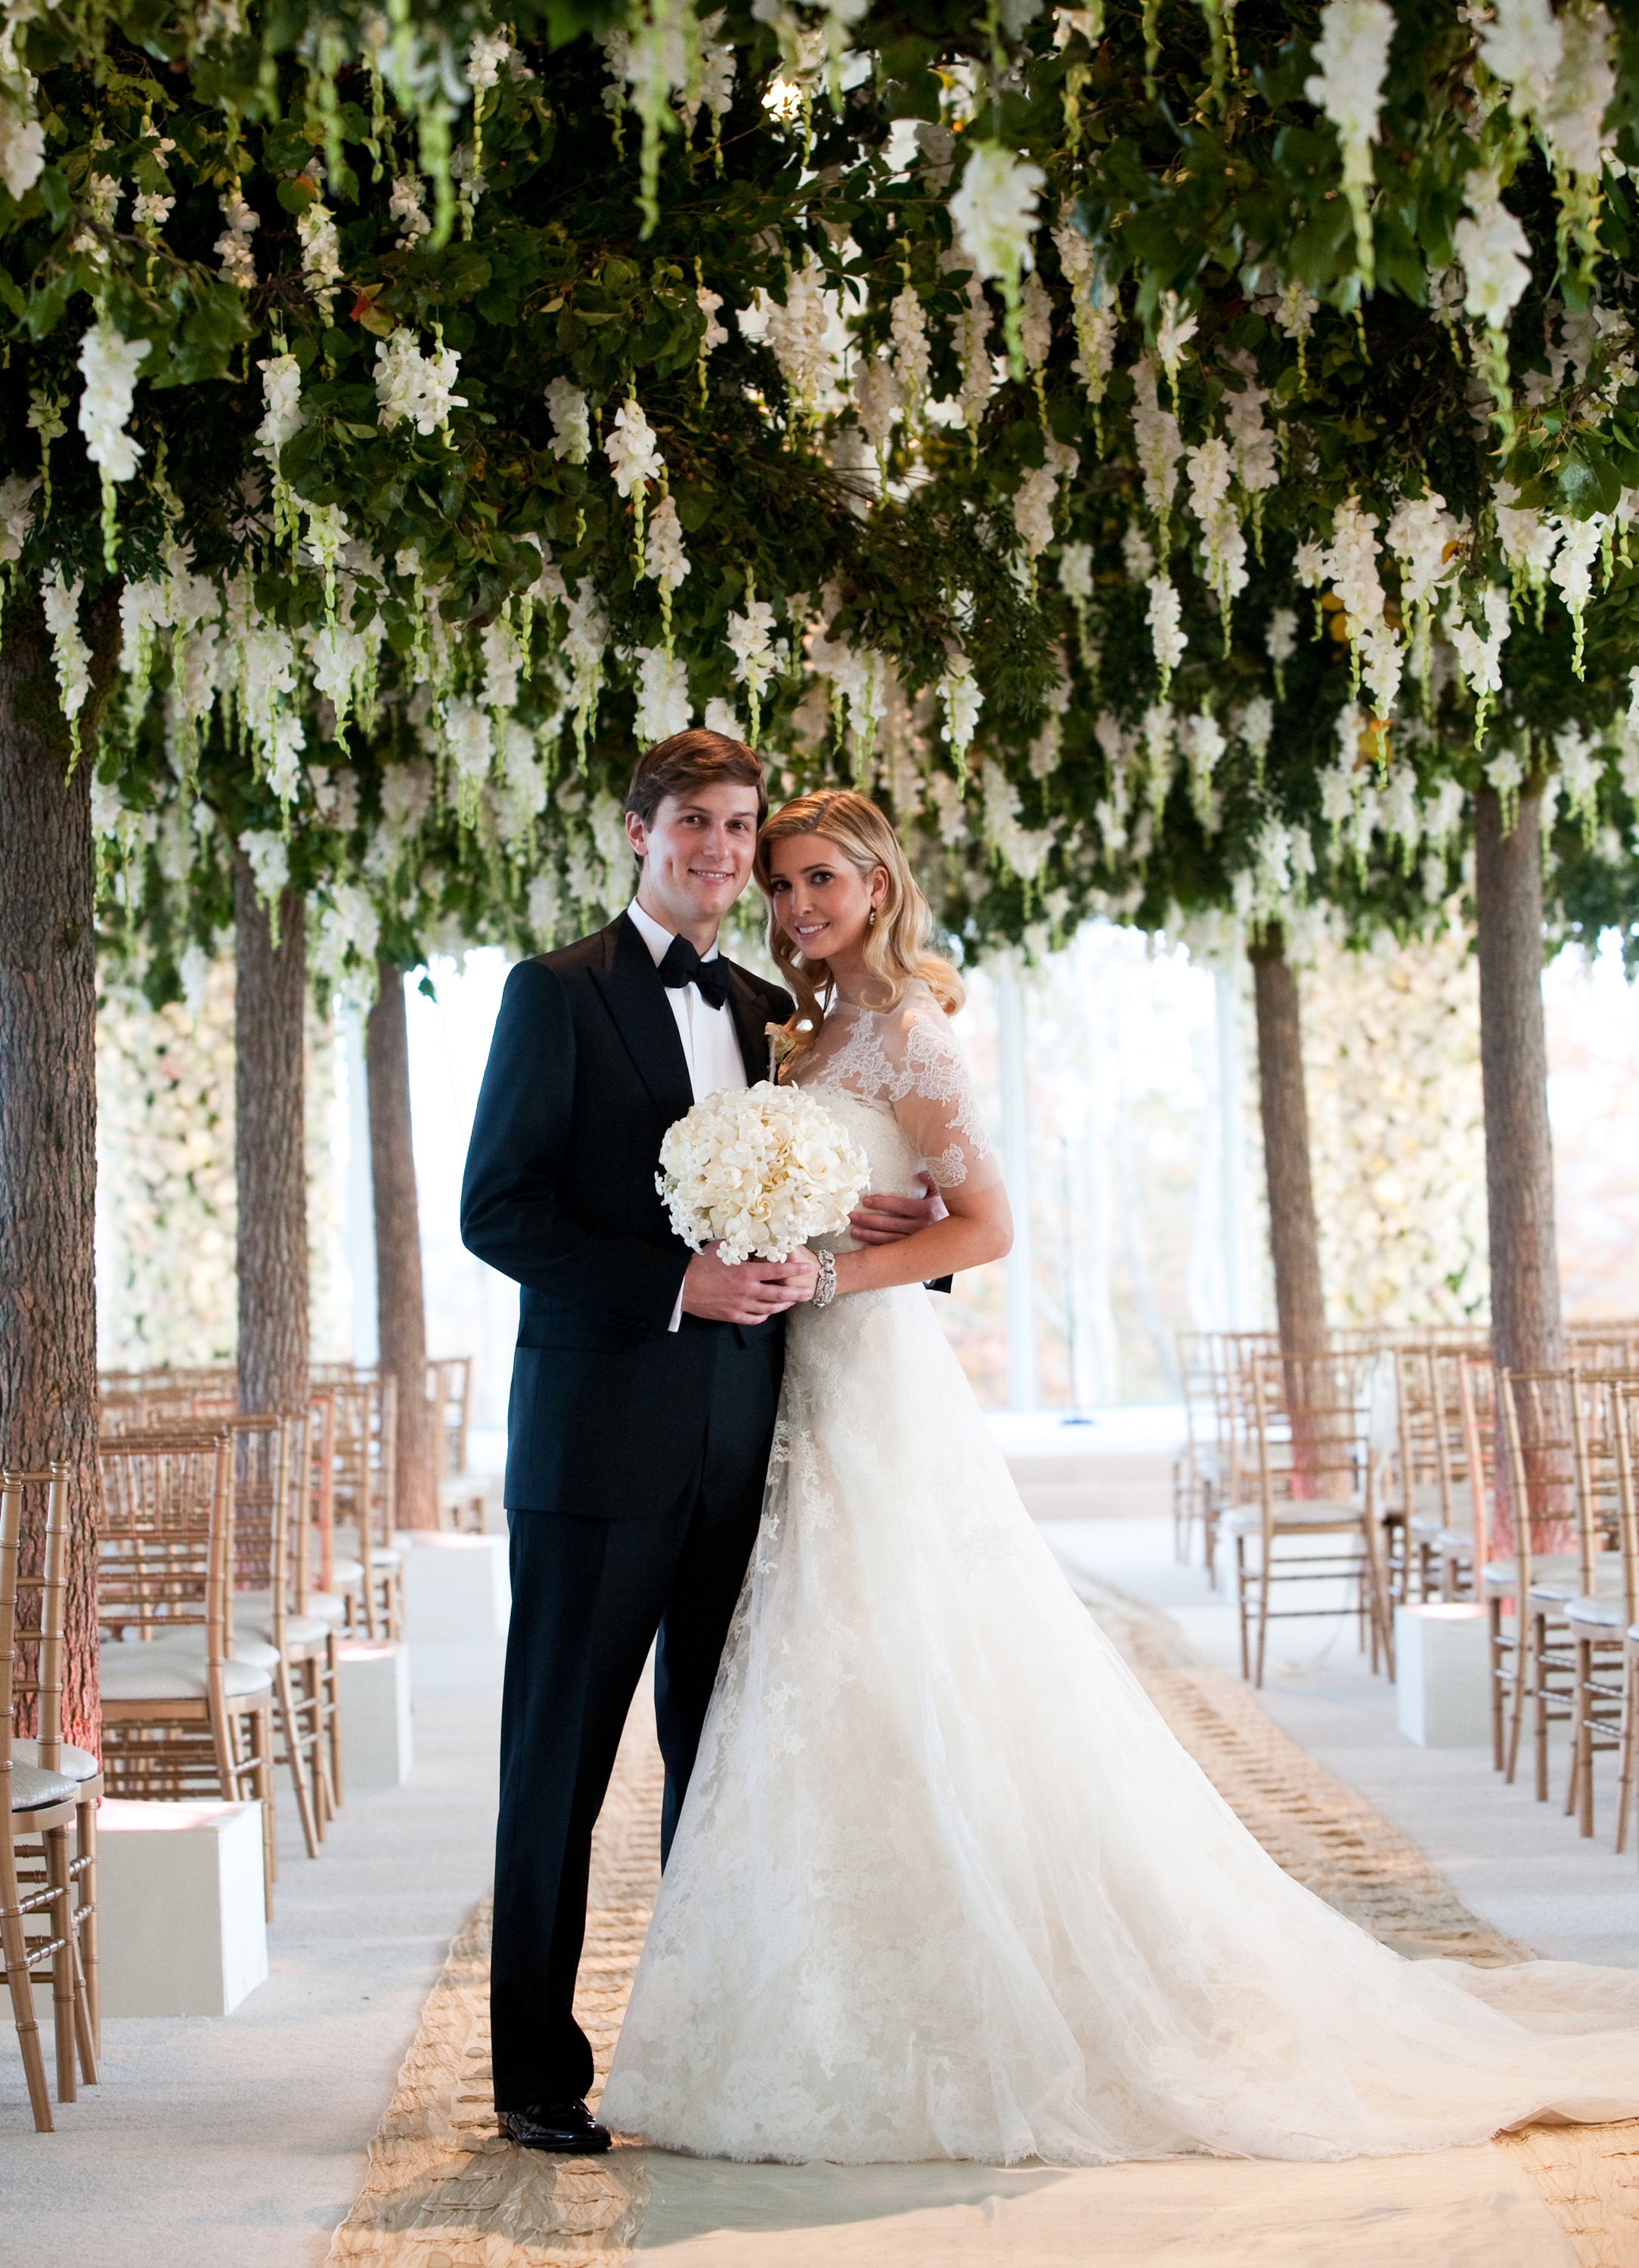 BEDMINSTER, NJ - OCTOBER, 25: In this handout image provided by Ivanka Trump and Jared Kushner, Ivanka Trump (R) and Jared Kushner (L) attend their wedding at Trump National Golf Club on October 25, 2009 in Bedminster, New Jersey. (Photo Brian Marcus/Fred Marcus Photography via Getty Images)